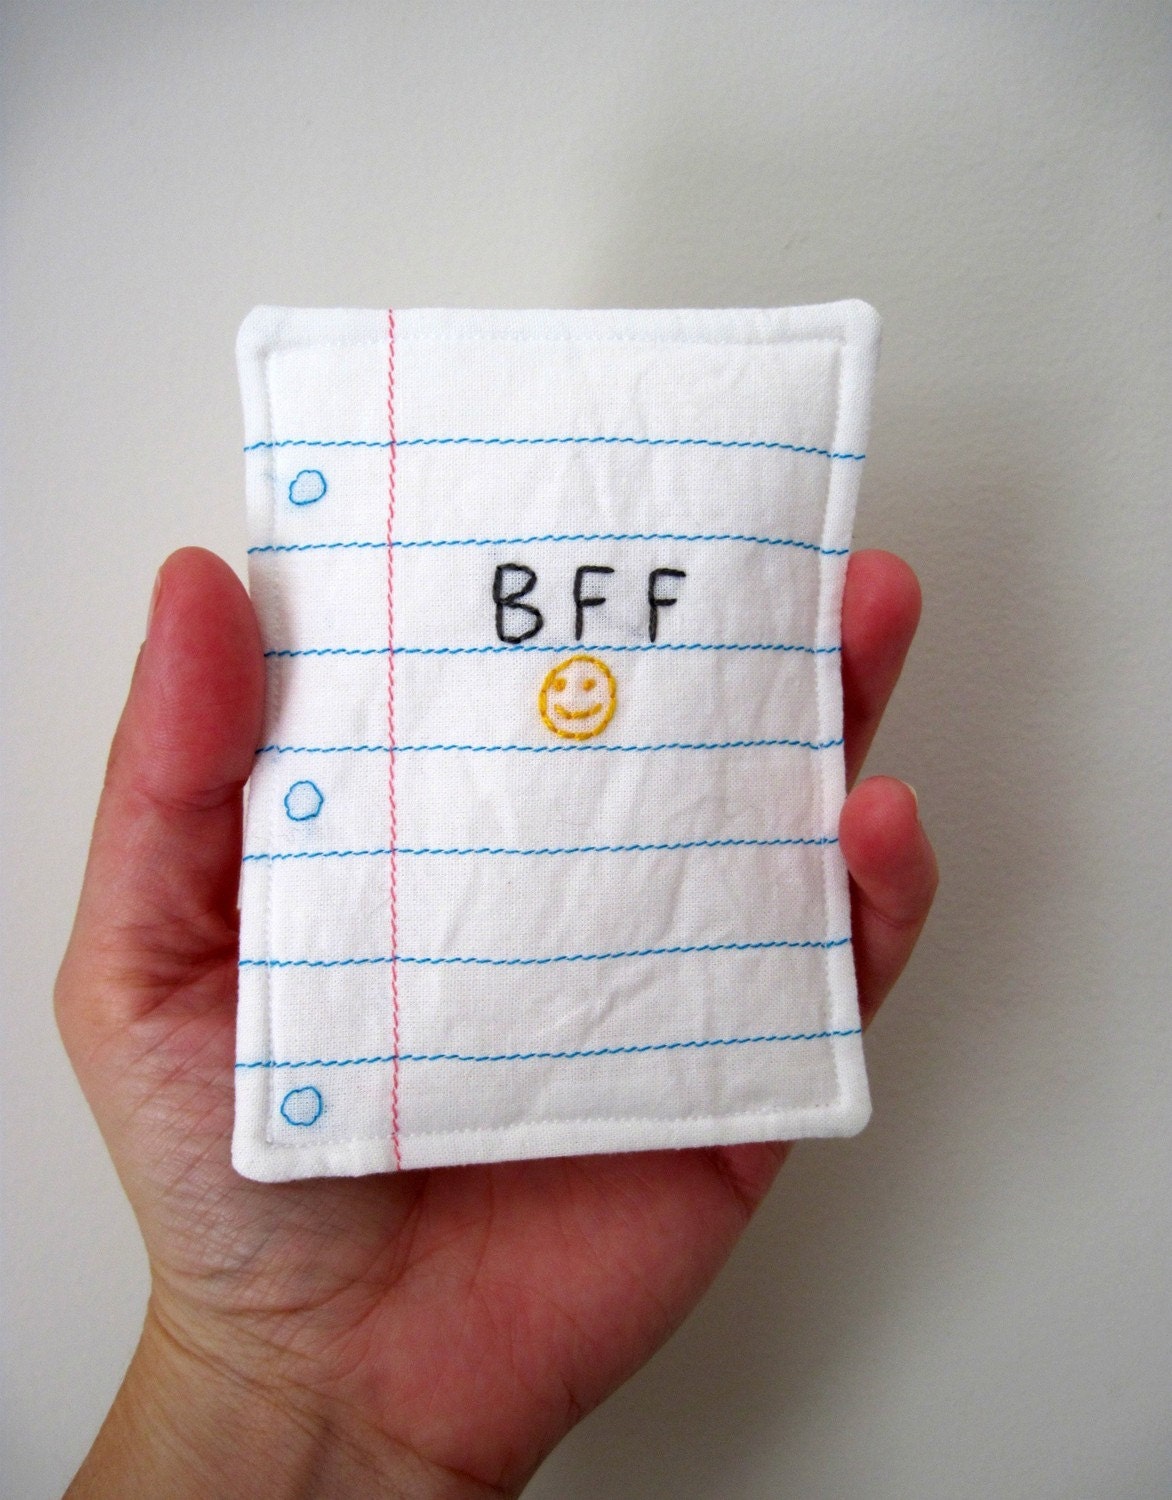 Best Friend Note Hand Embroidery with Notebook Paper Design